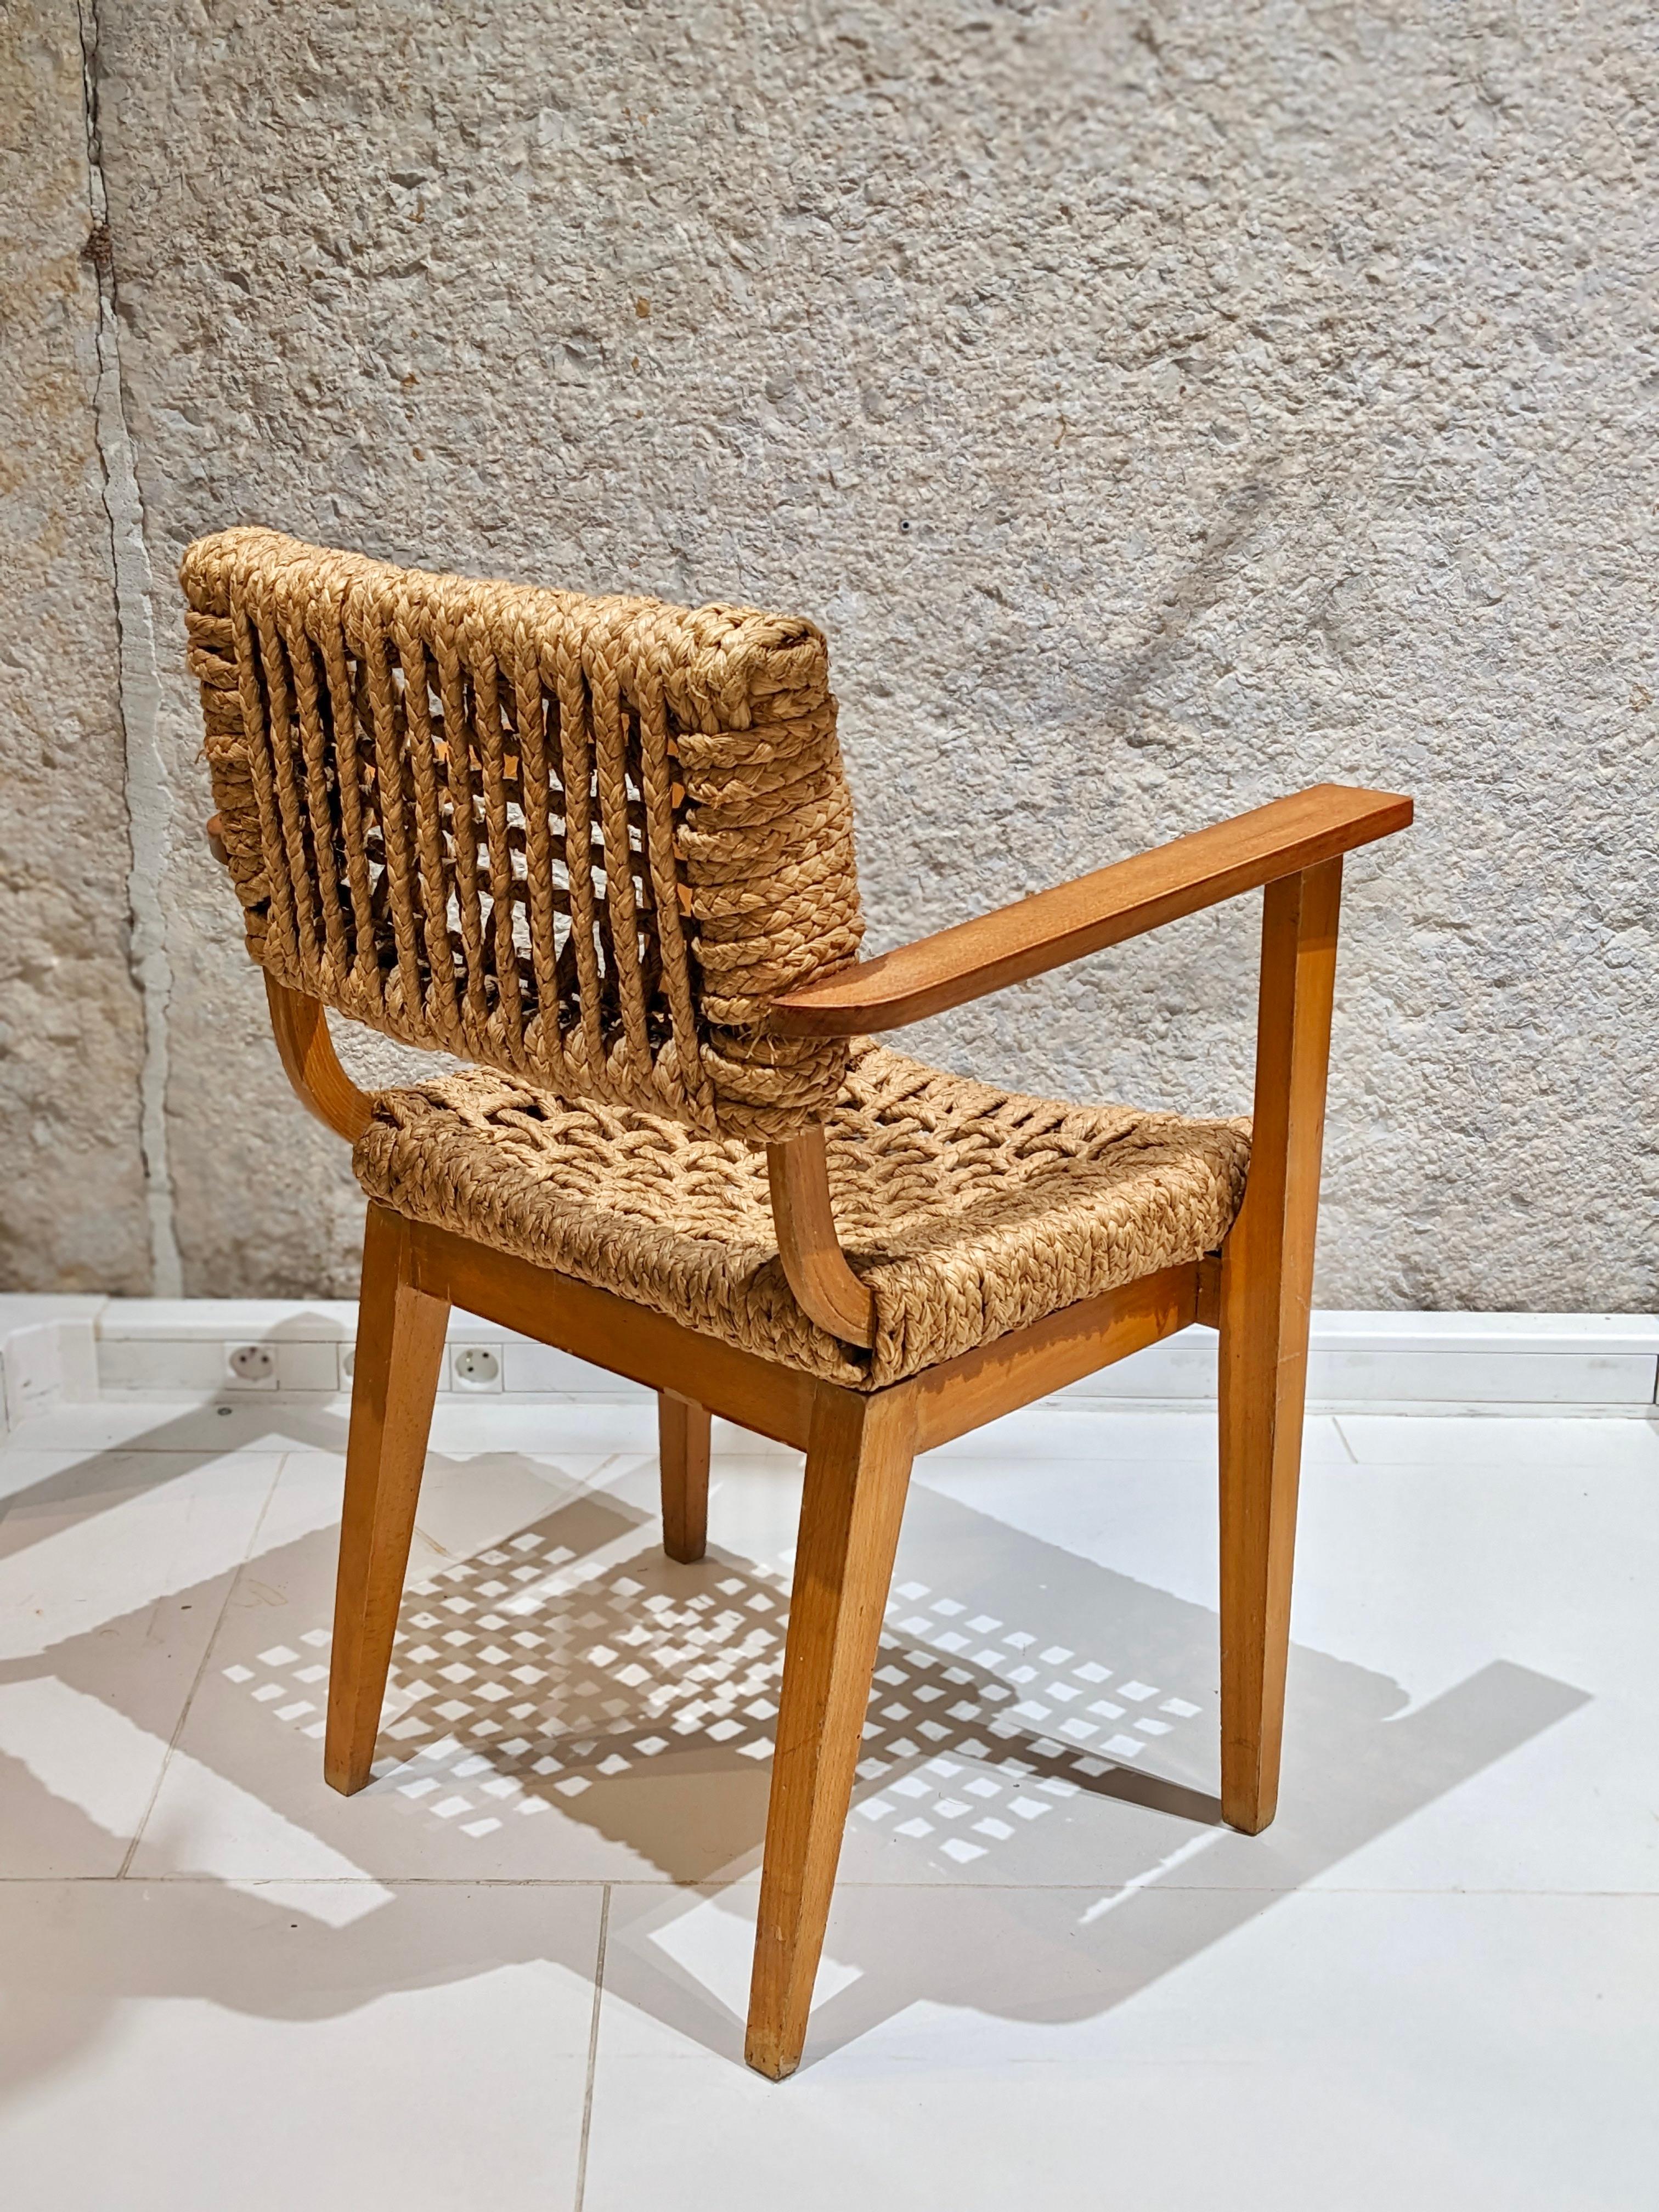 Mid-Century Modern Armchair in braided rope by Adrien Audoux and Frida Minet. For Sale